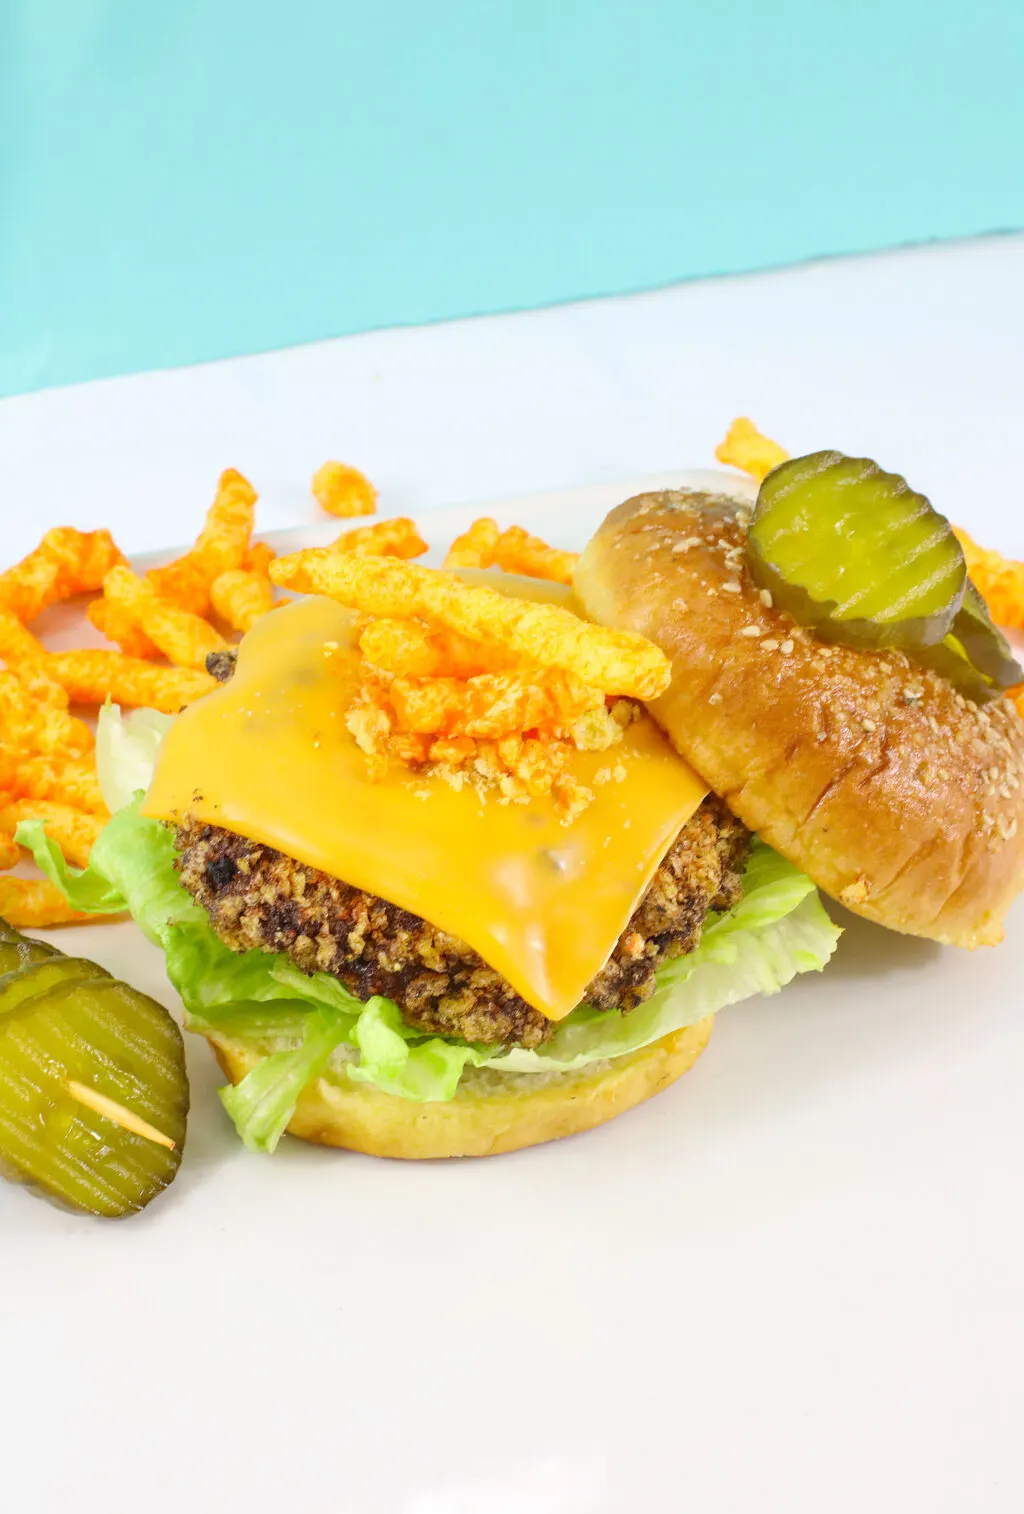 cheeseburger open with cheetos on top